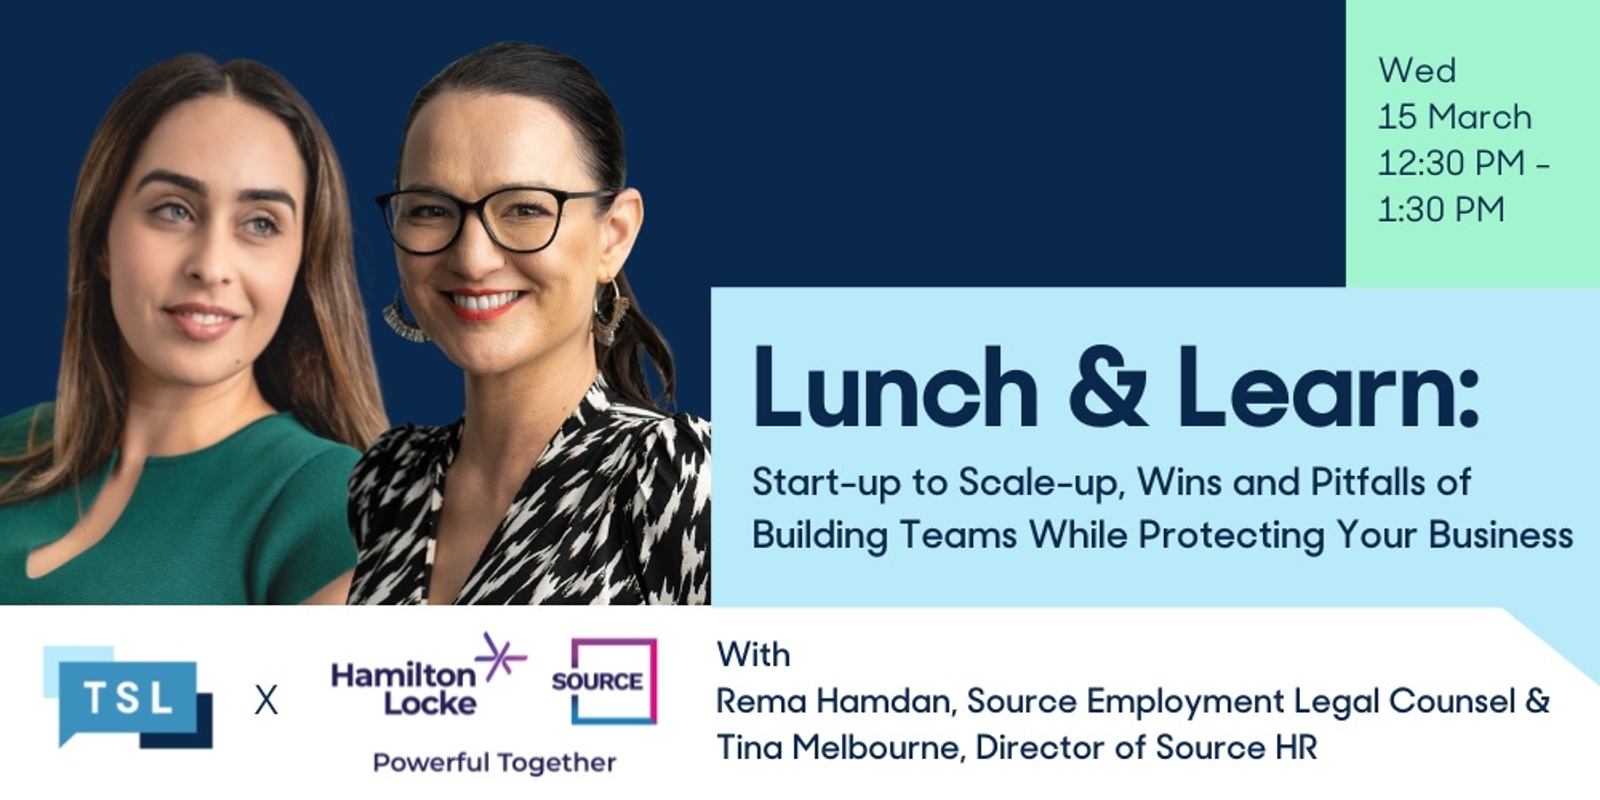 Banner image for Lunch & Learn: Start-up to Scale-up, Wins and Pitfalls of Building Teams While Protecting Your Business